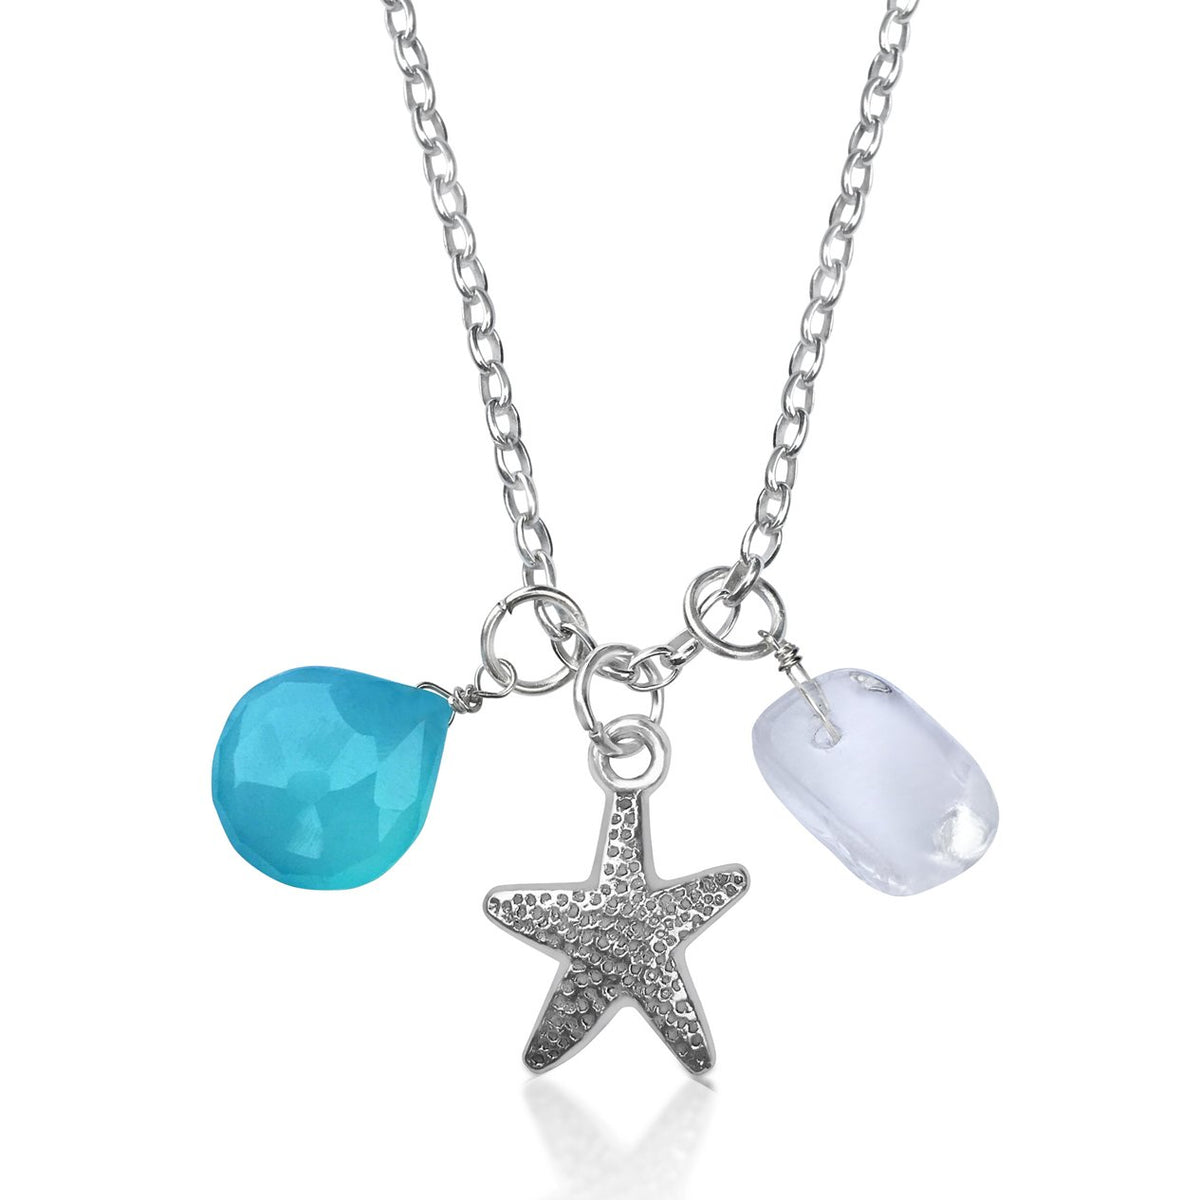 Ocean Inspired Starfish Charm Necklace with Aquamarine and River Crystal